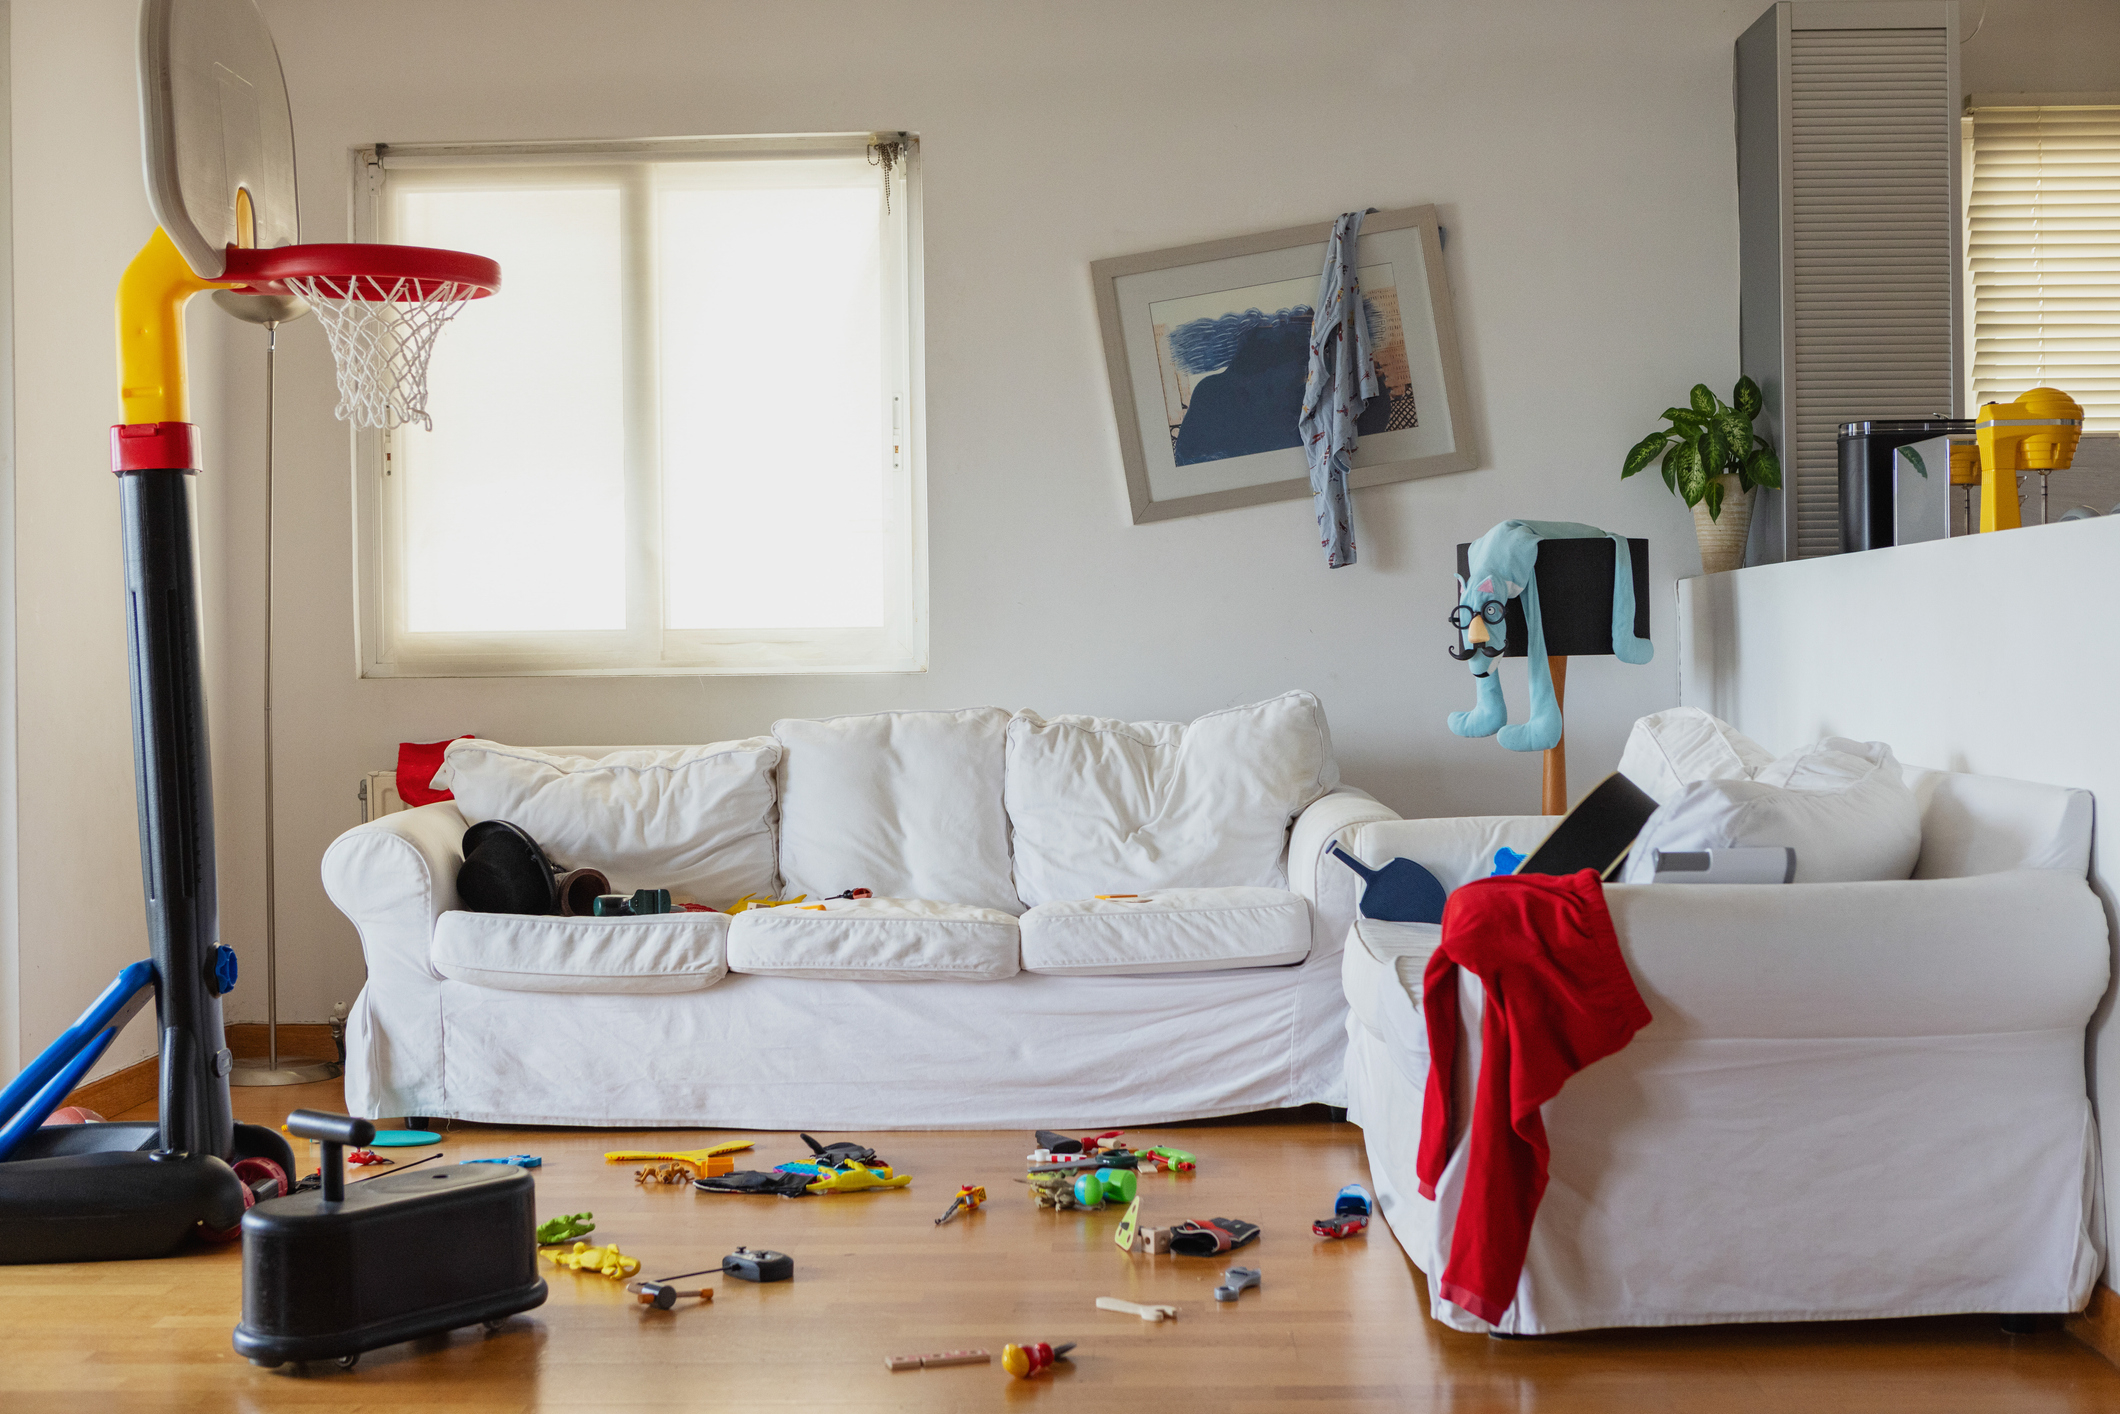 Living room with scattered toys and a basketball hoop, depicting a family space